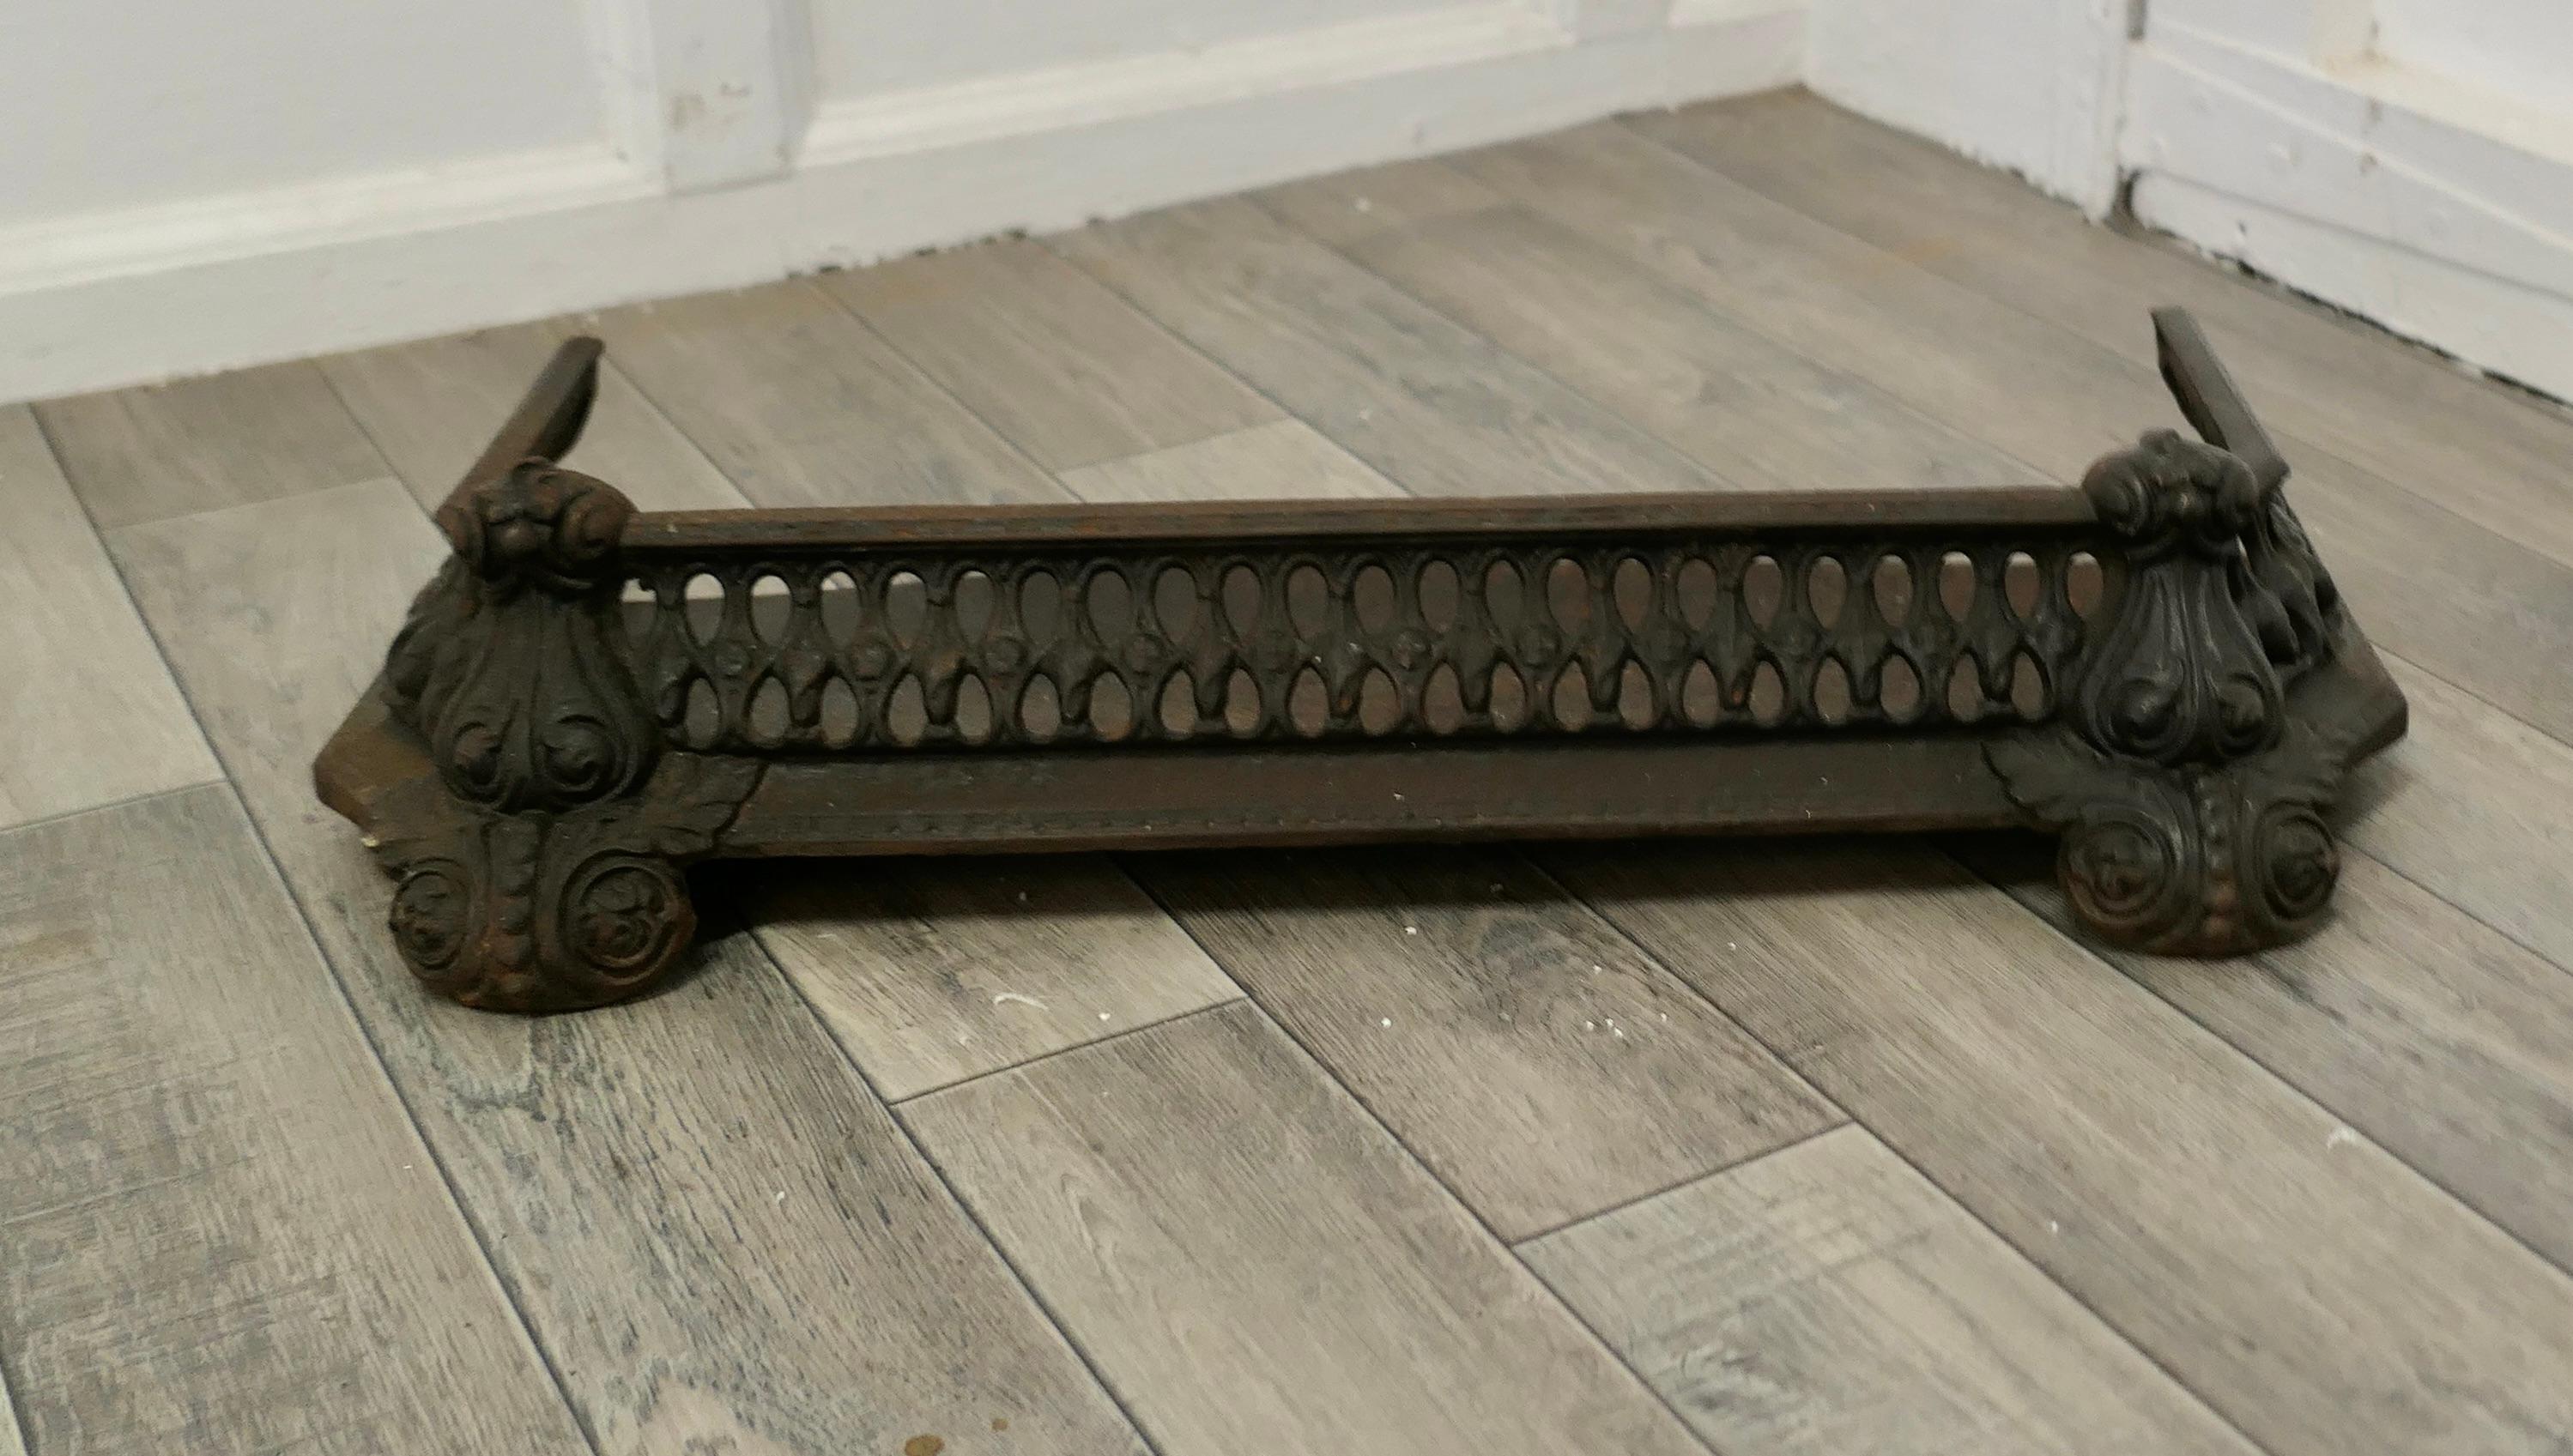 Art Nouveau Cast Iron Fender or Dog Grate

This is a Good Victorian Fender it is good and heavy, fenders like this were known as Dog Grates as they serve to rest the fire tools and keep any rolling ash in check
The Fender is in good sound condition